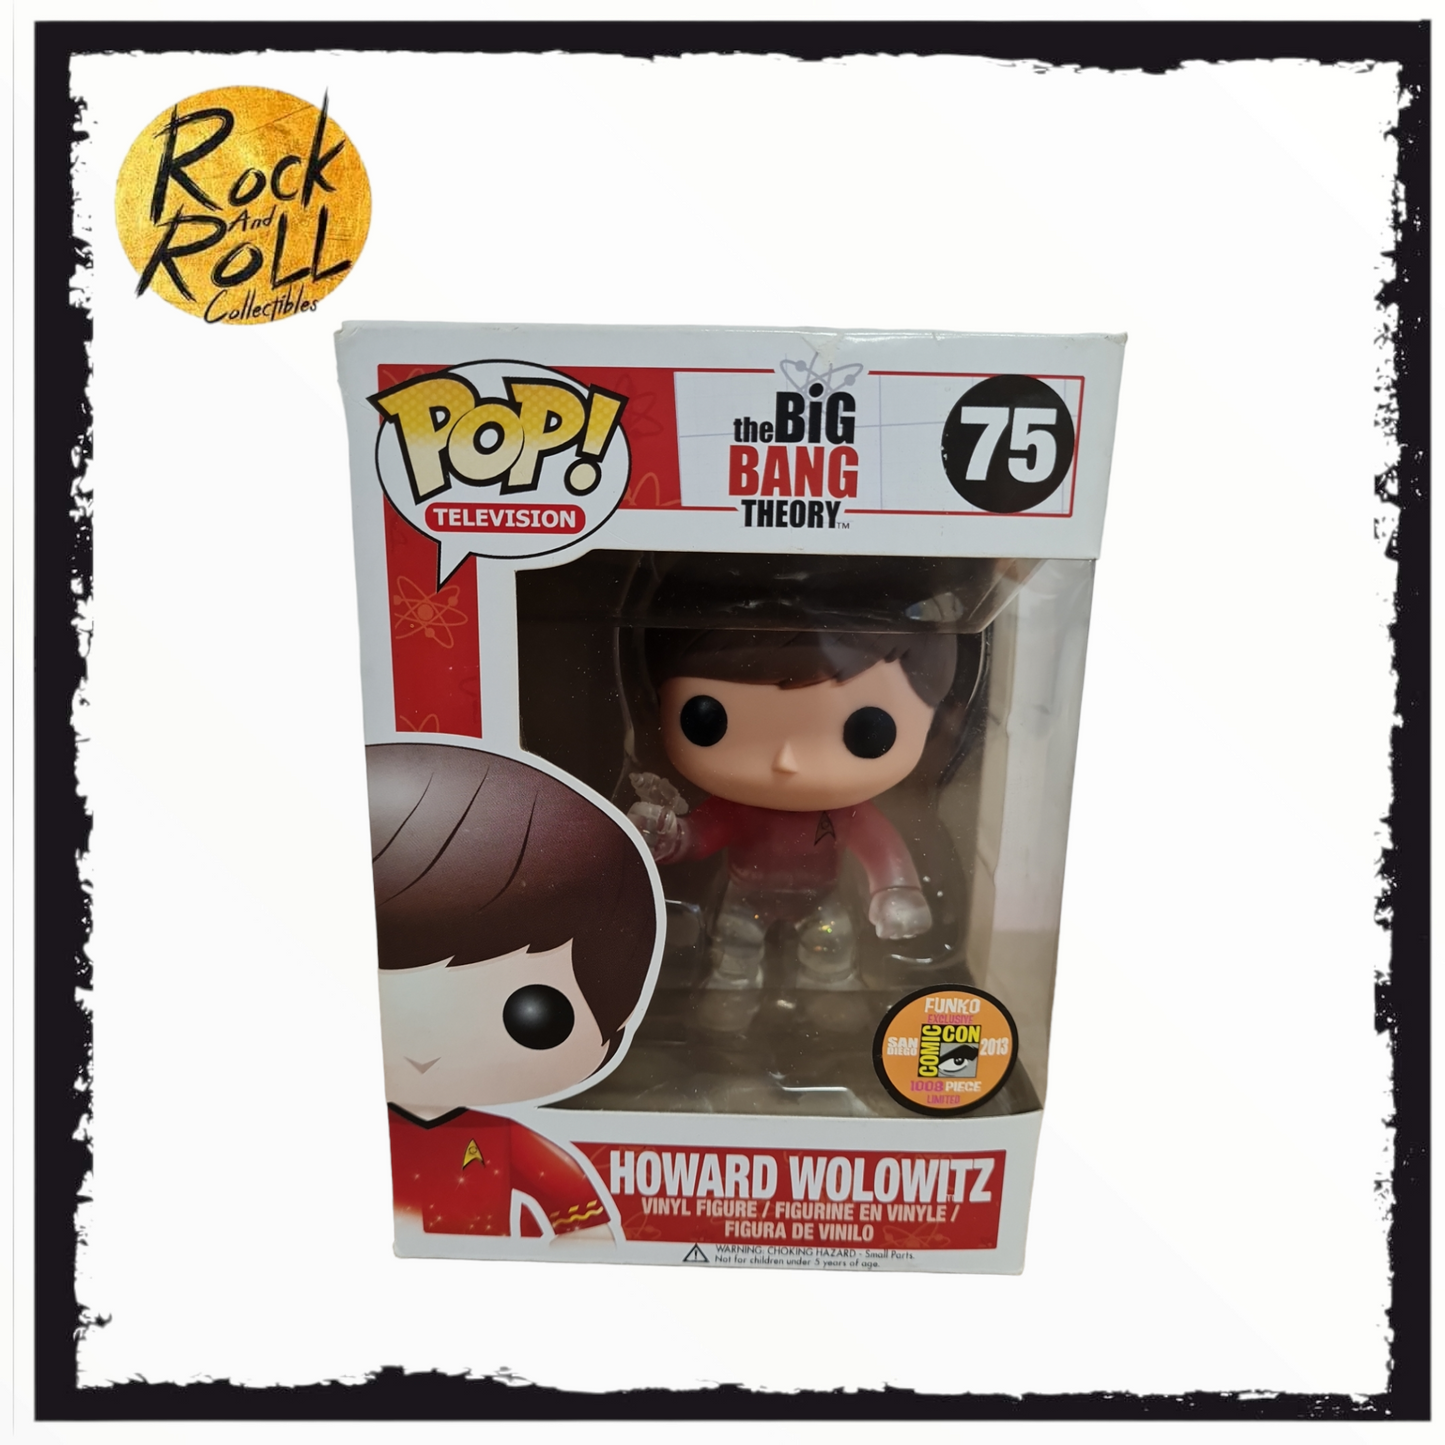 The Big Bang Theory - Howard Wolowitz Star Trek (Transporting) Funko Pop! #75 2013 SDCC 1008pcs LE. Condition 7.5/10